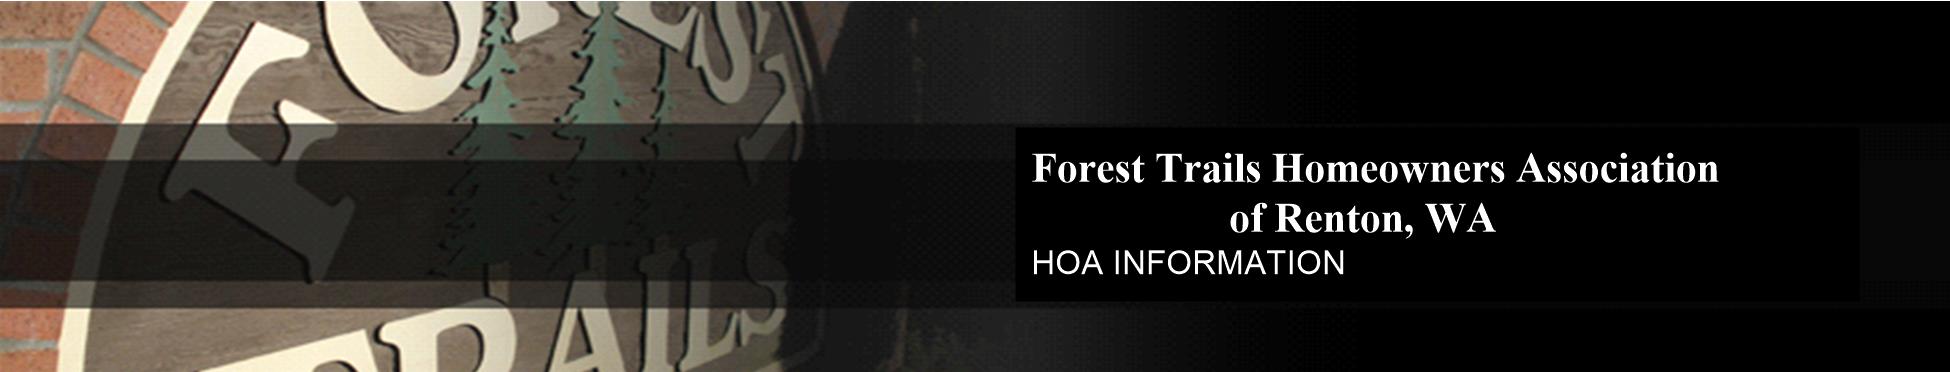 Forest Trails HOA